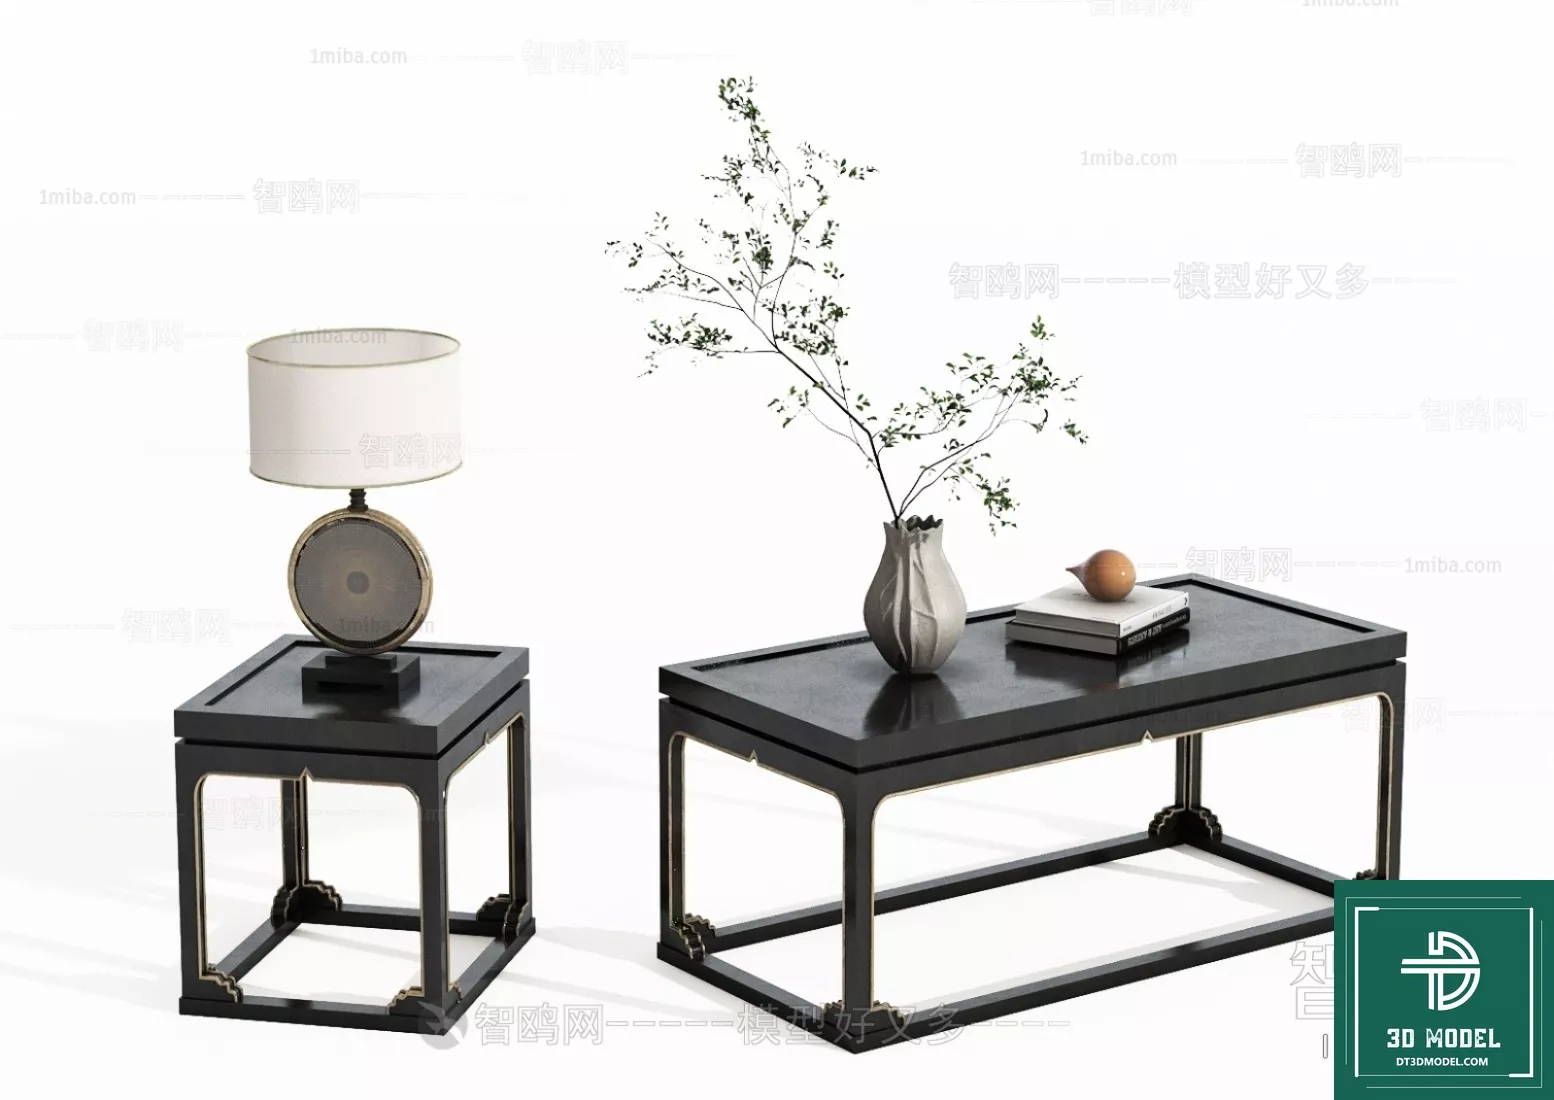 MODERN TEA TABLE - SKETCHUP 3D MODEL - VRAY OR ENSCAPE - ID14971